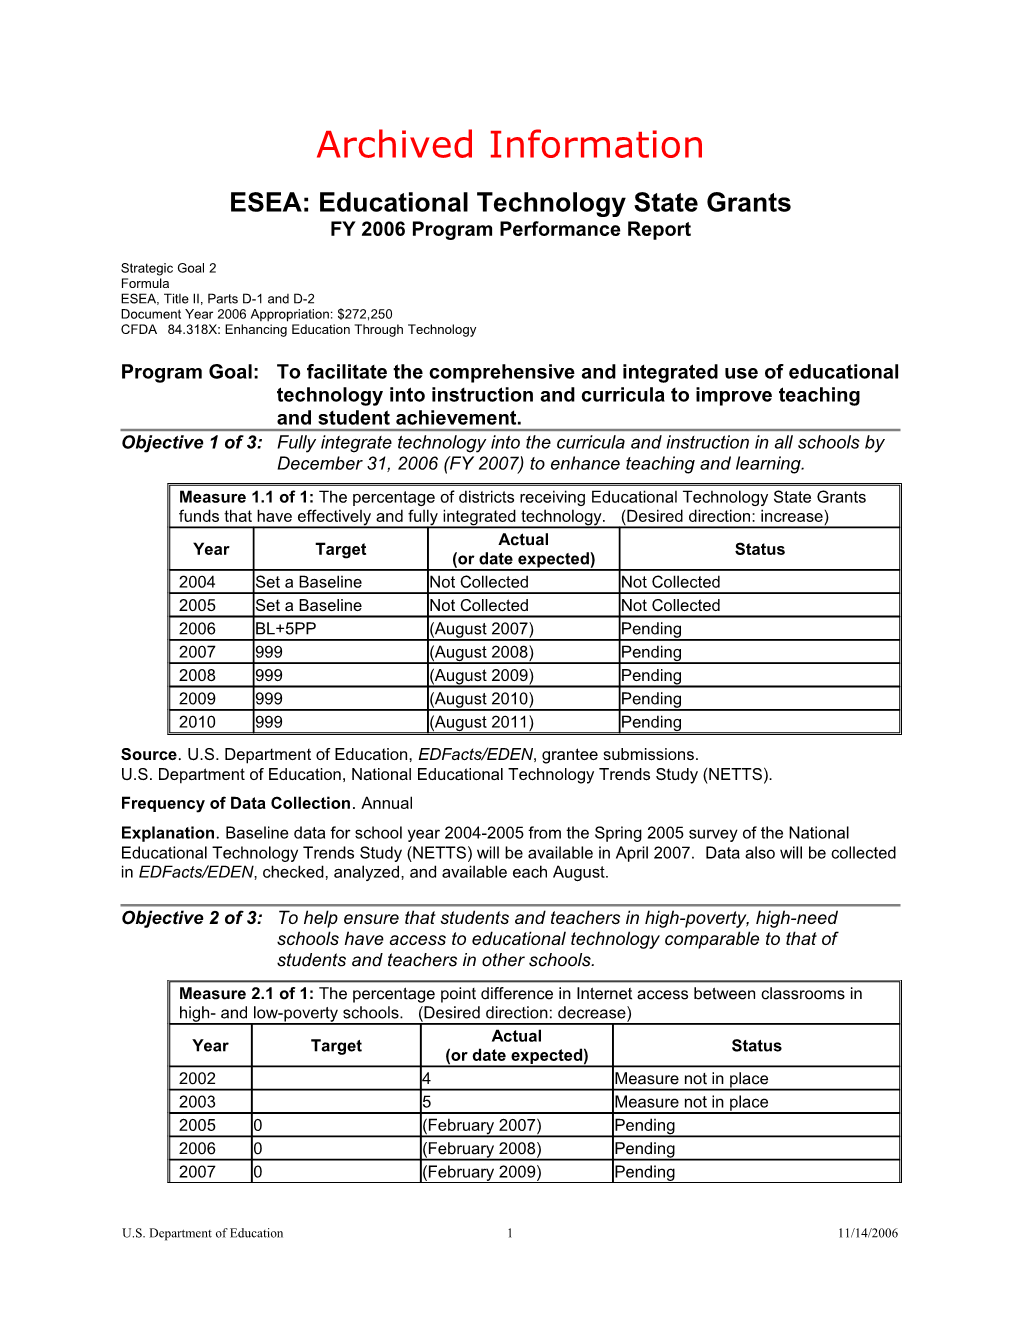 Archived: ESEA: Educational Technology State Grants (MS Word)